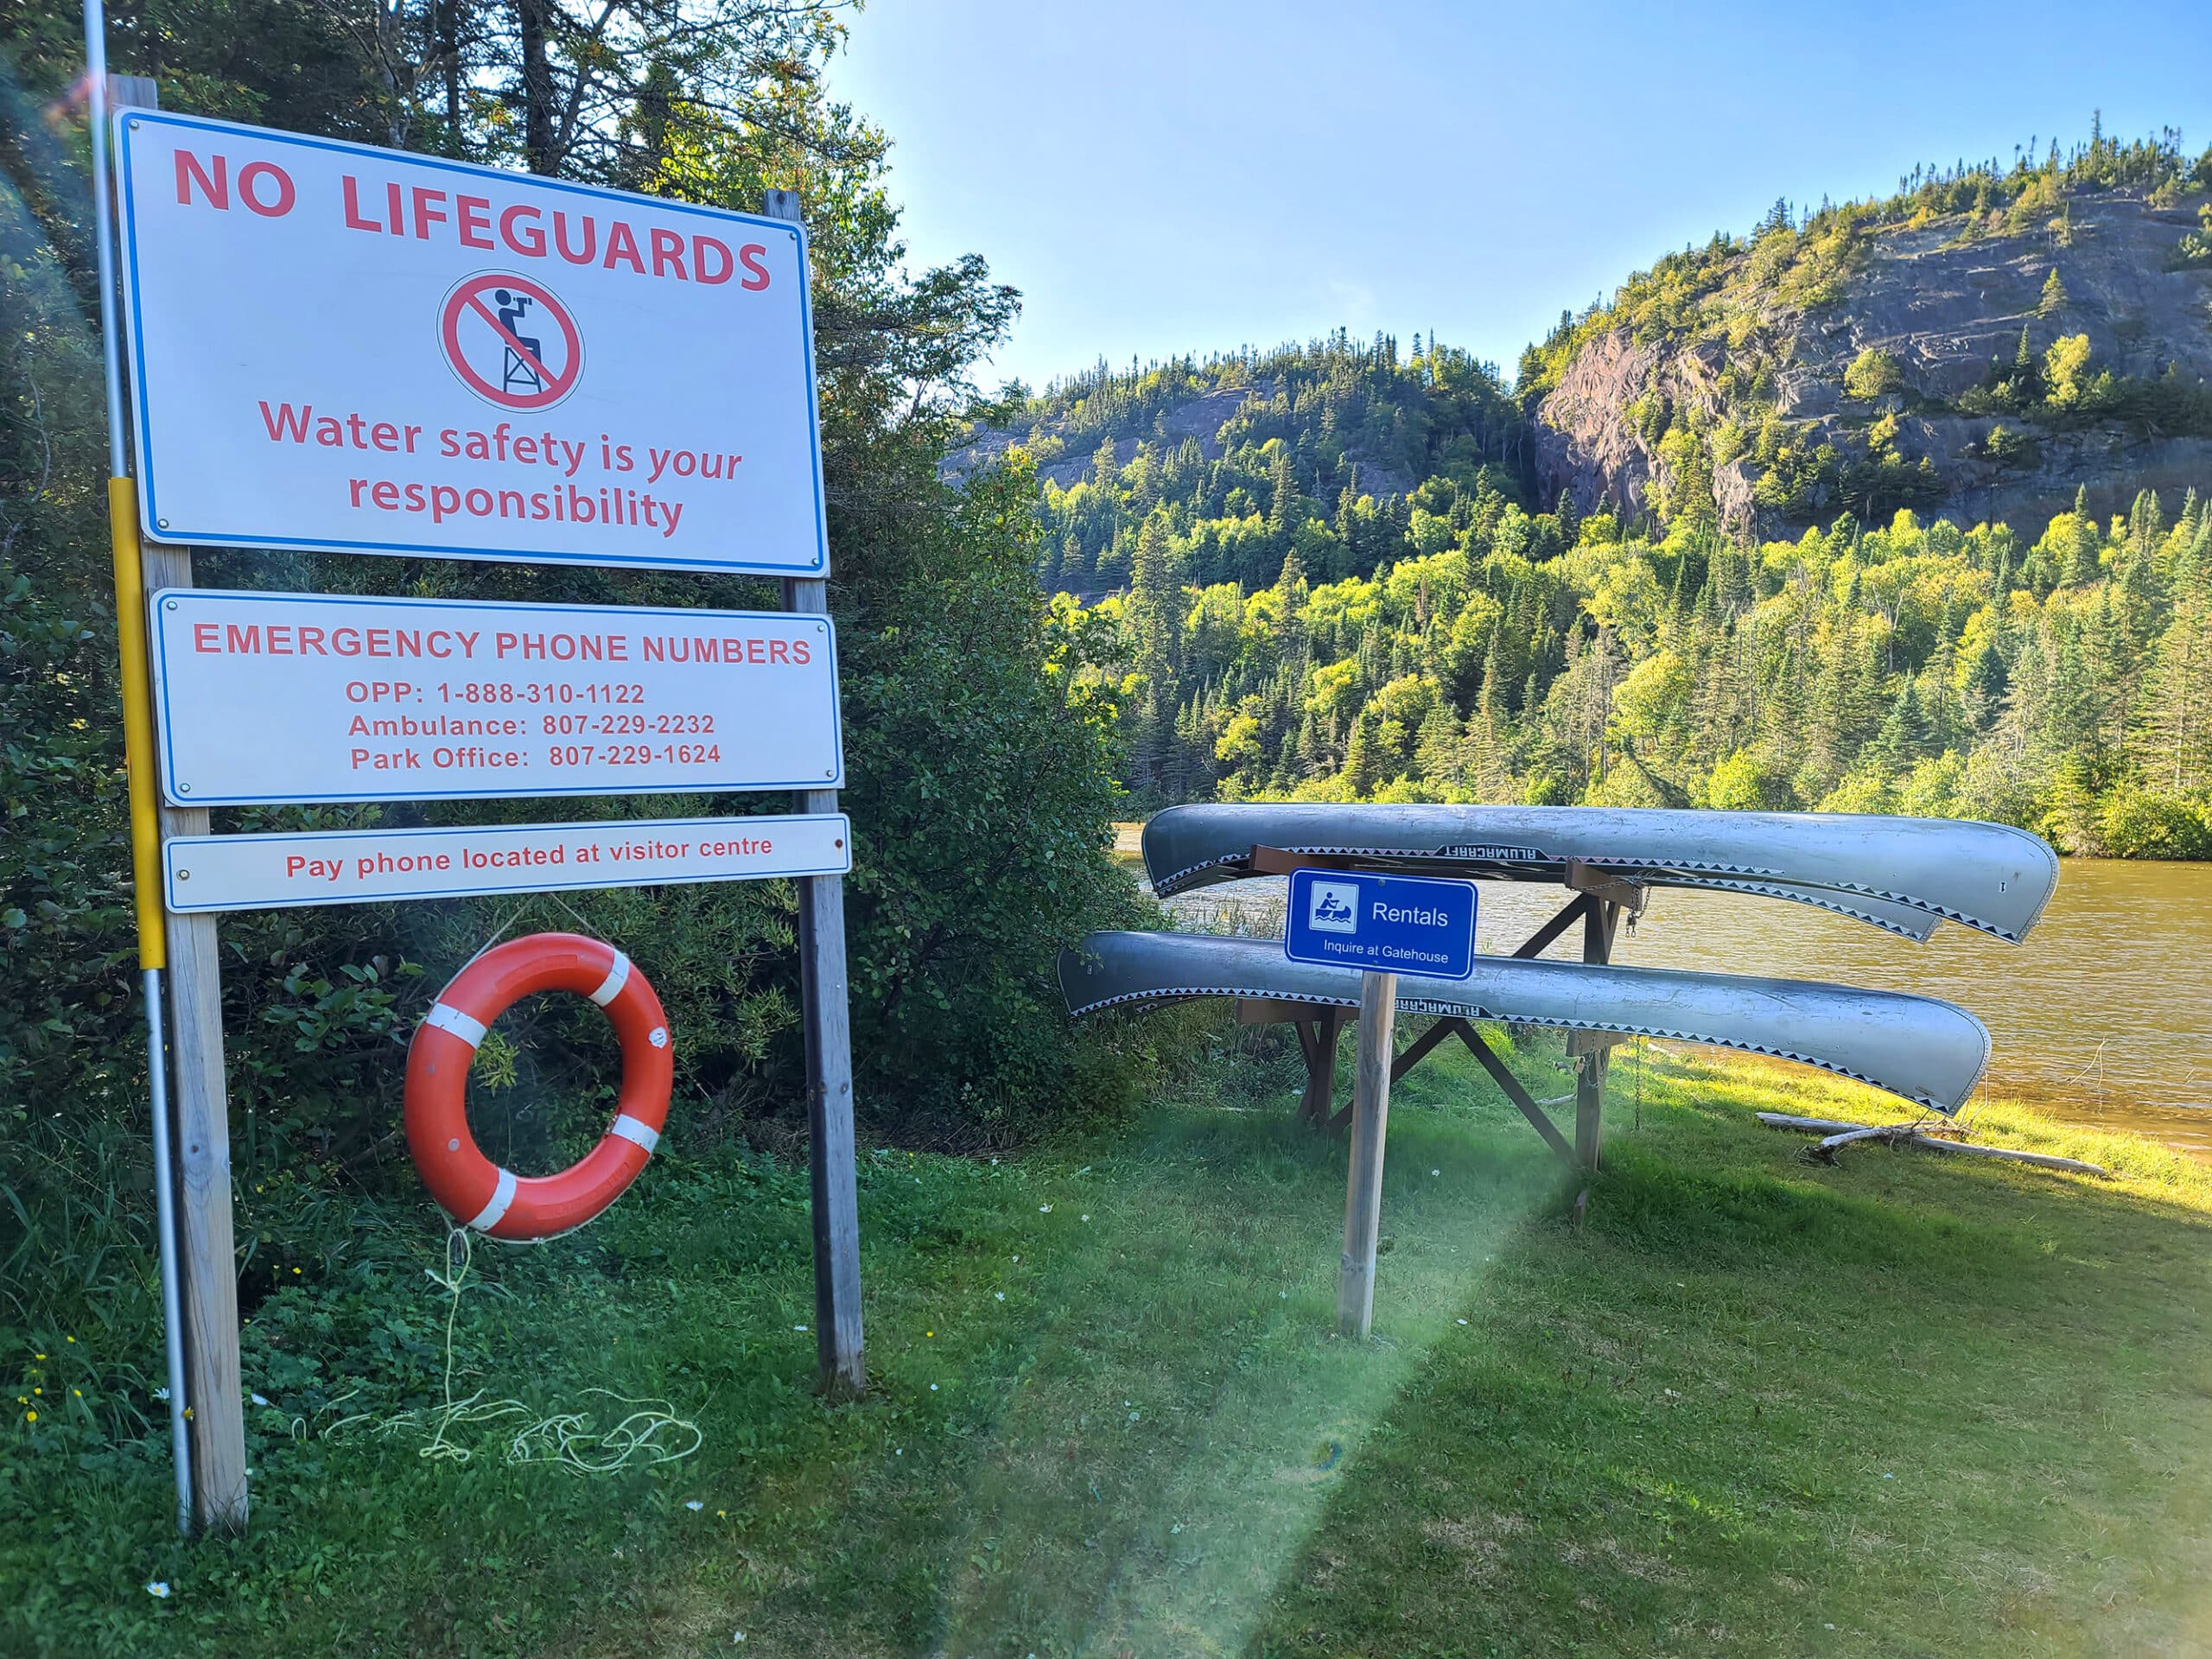 A canoe rack and a sign warning that there are no lifeguards on duty.